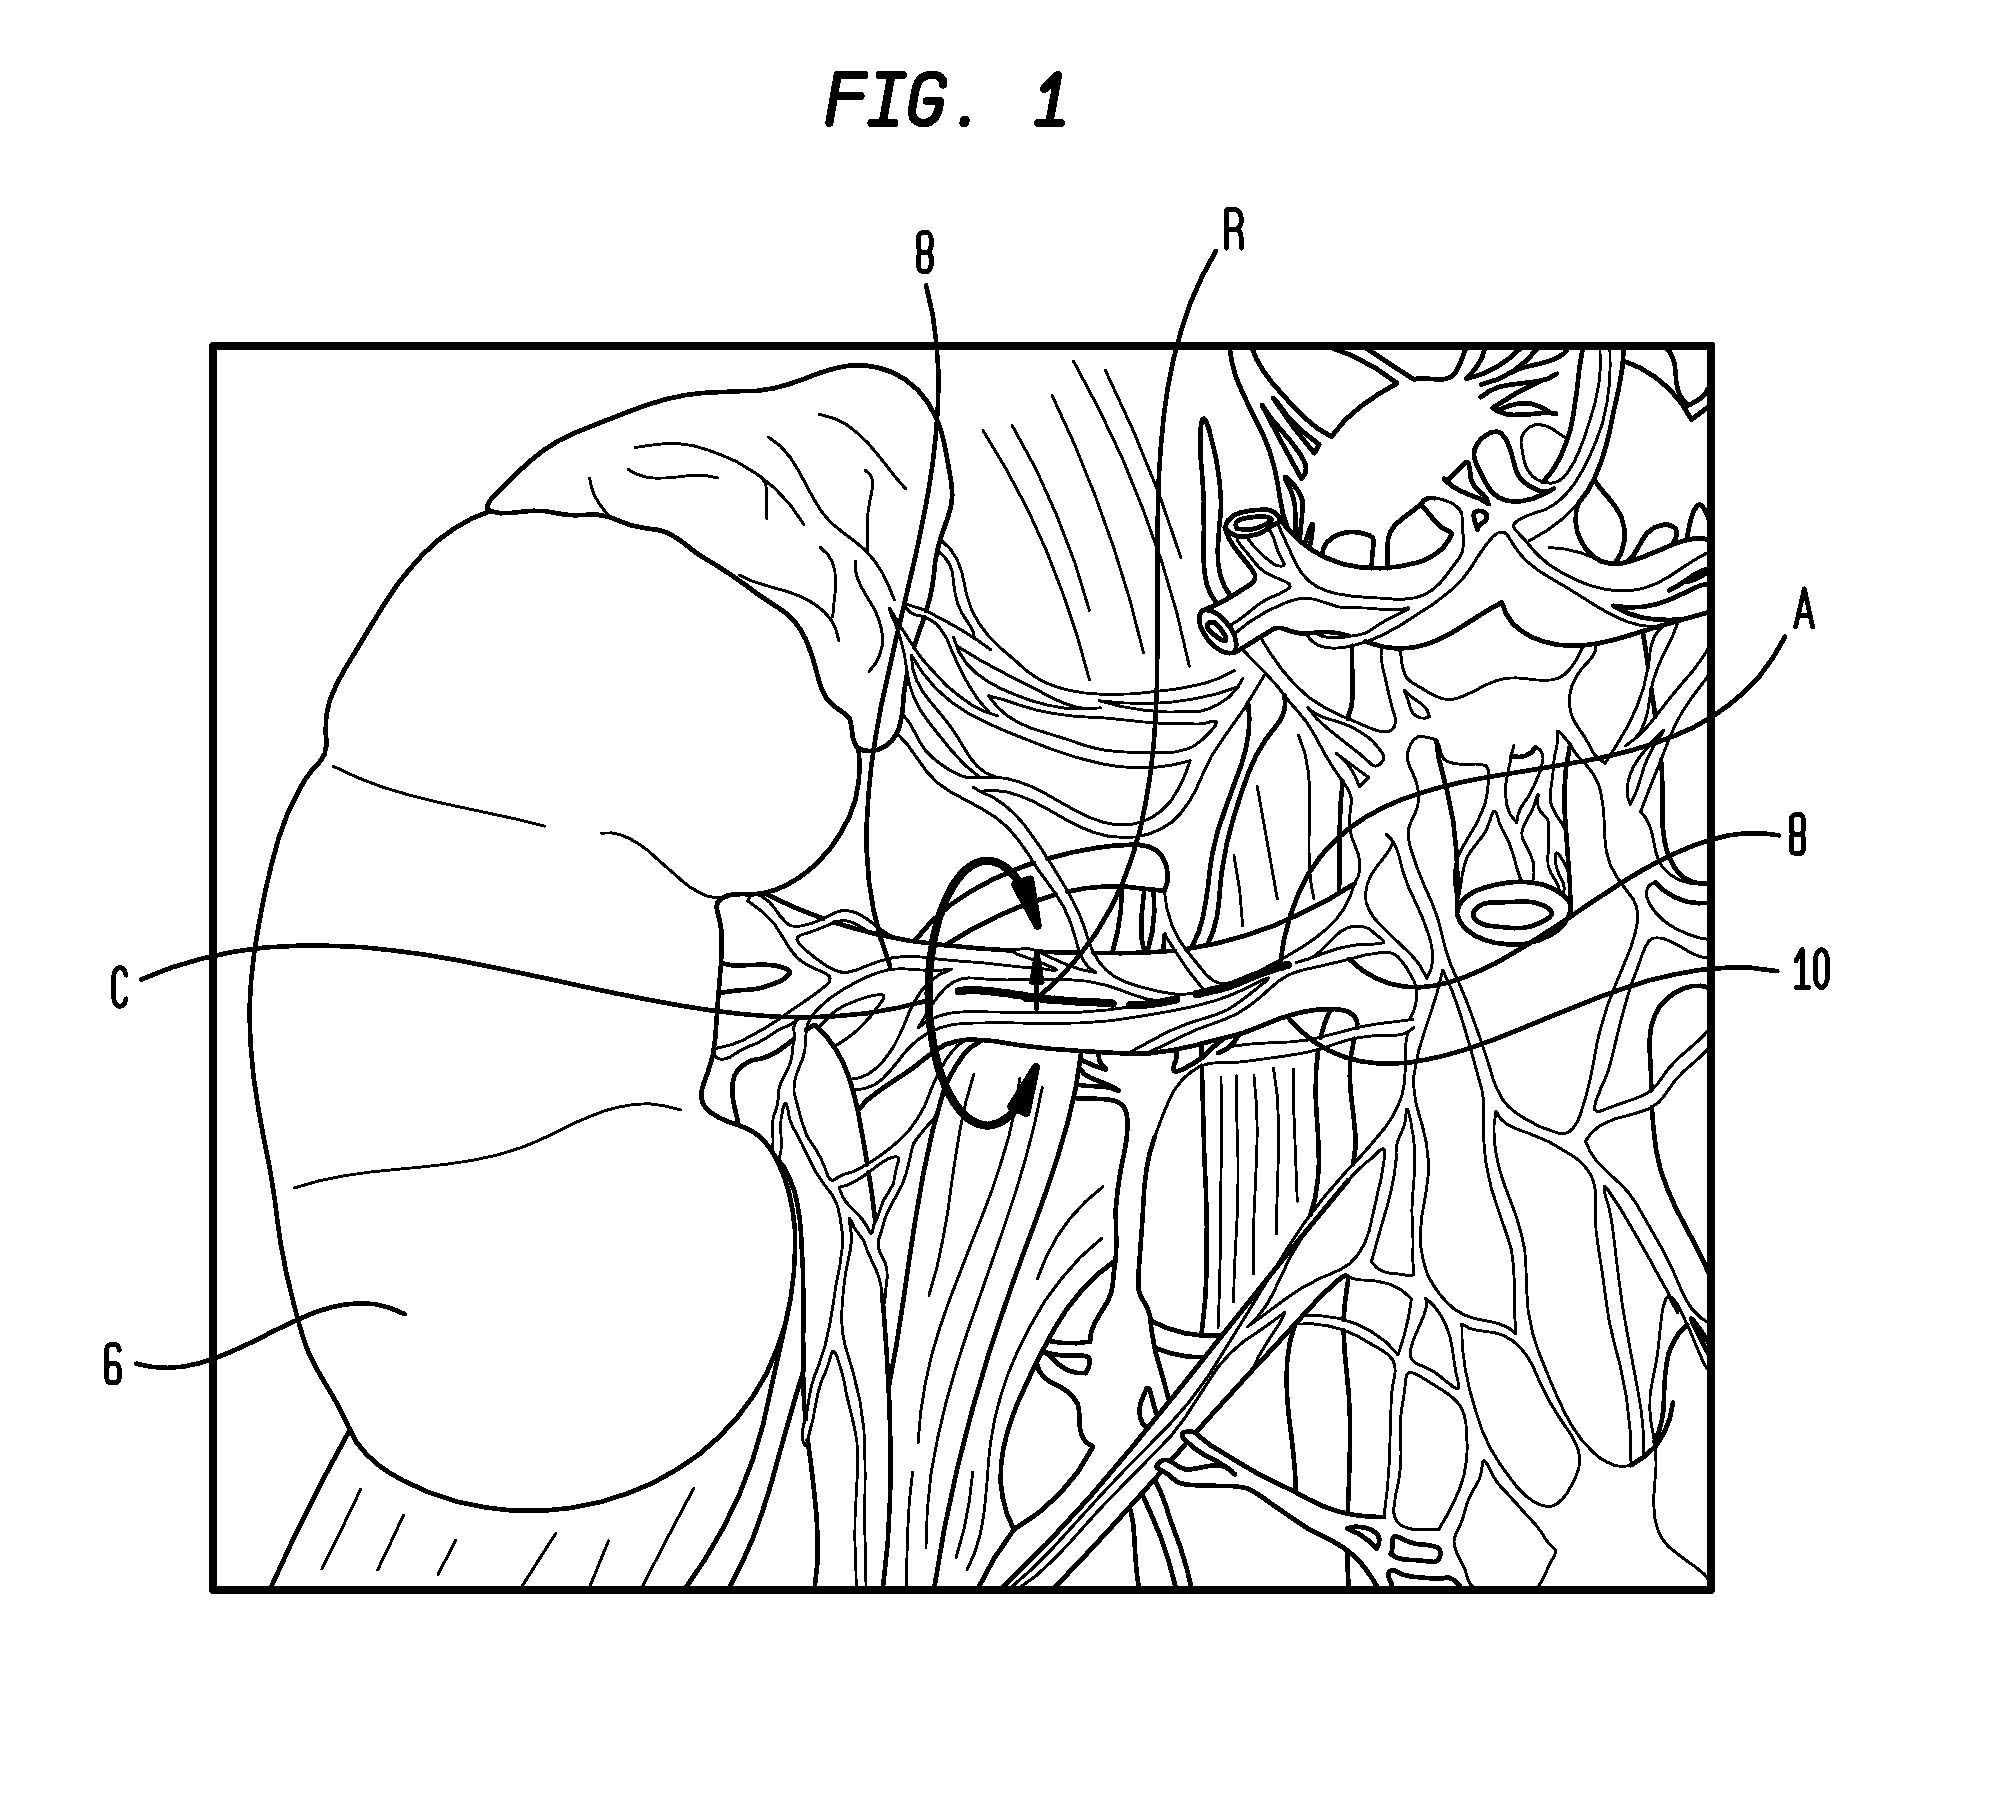 Method and Apparatus for Treatment of Hypertension Through Percutaneous Ultrasound Renal Denervation